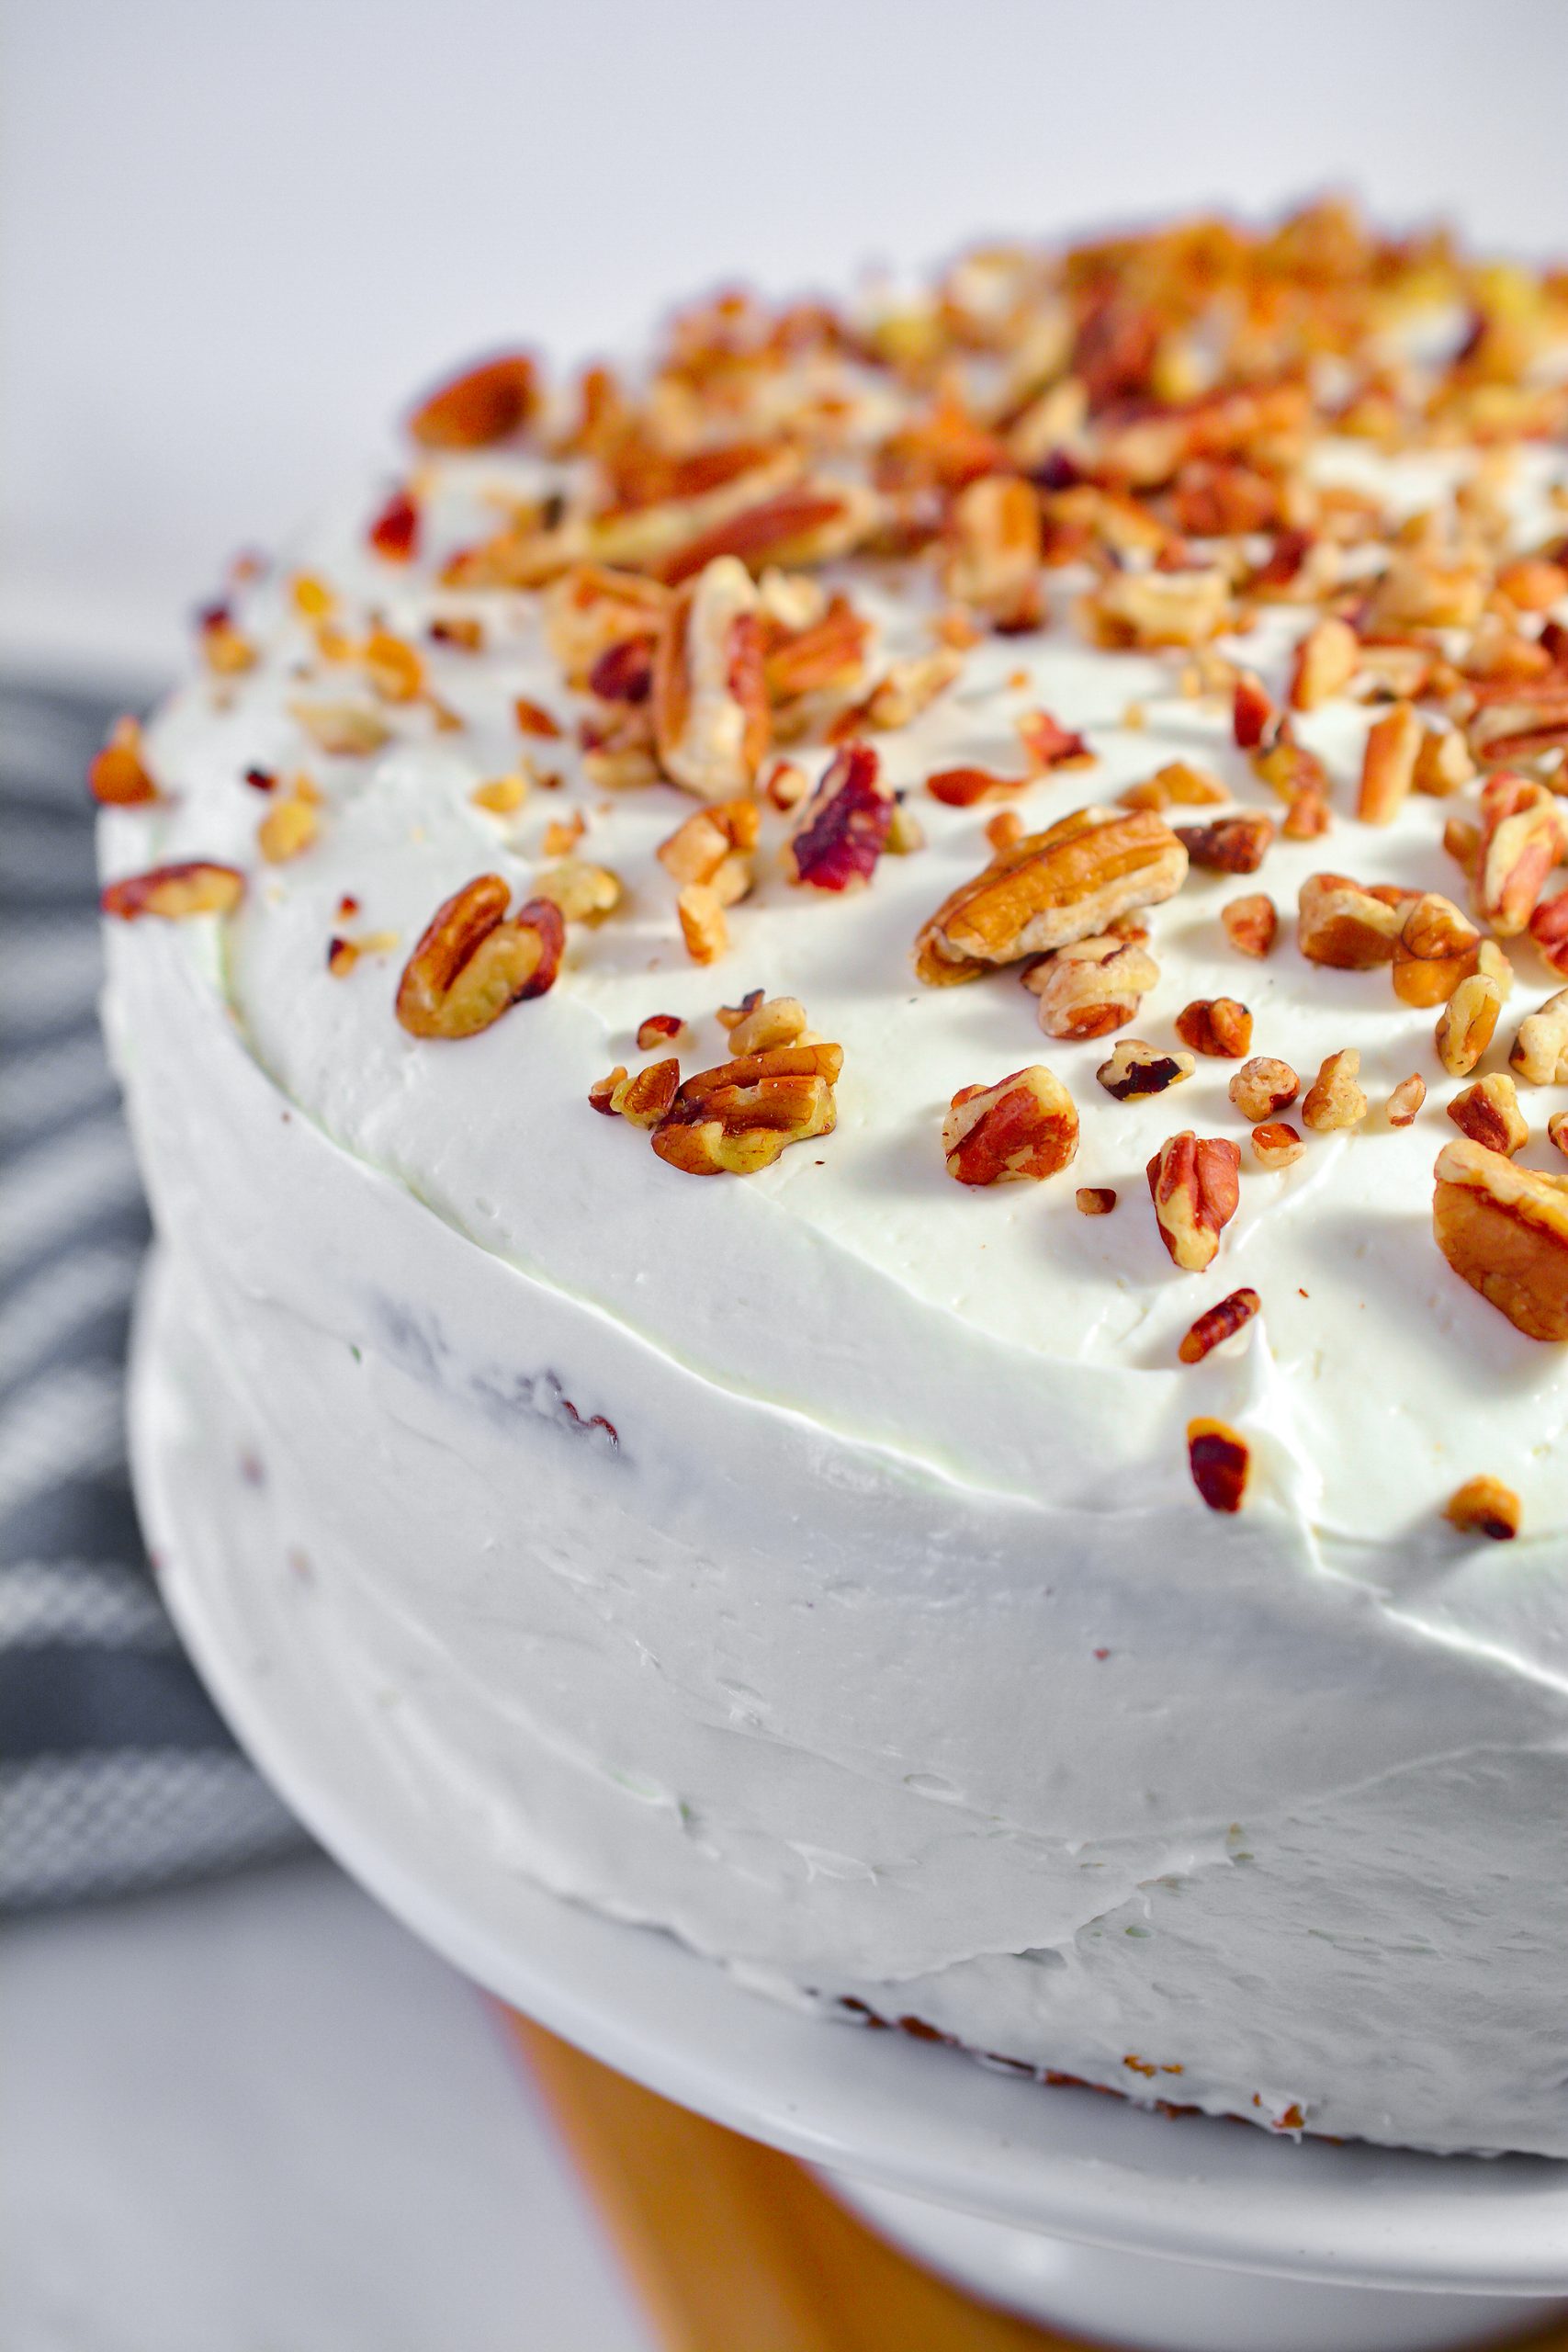 shortcut carrot cake, carrot cake with spice cake mix